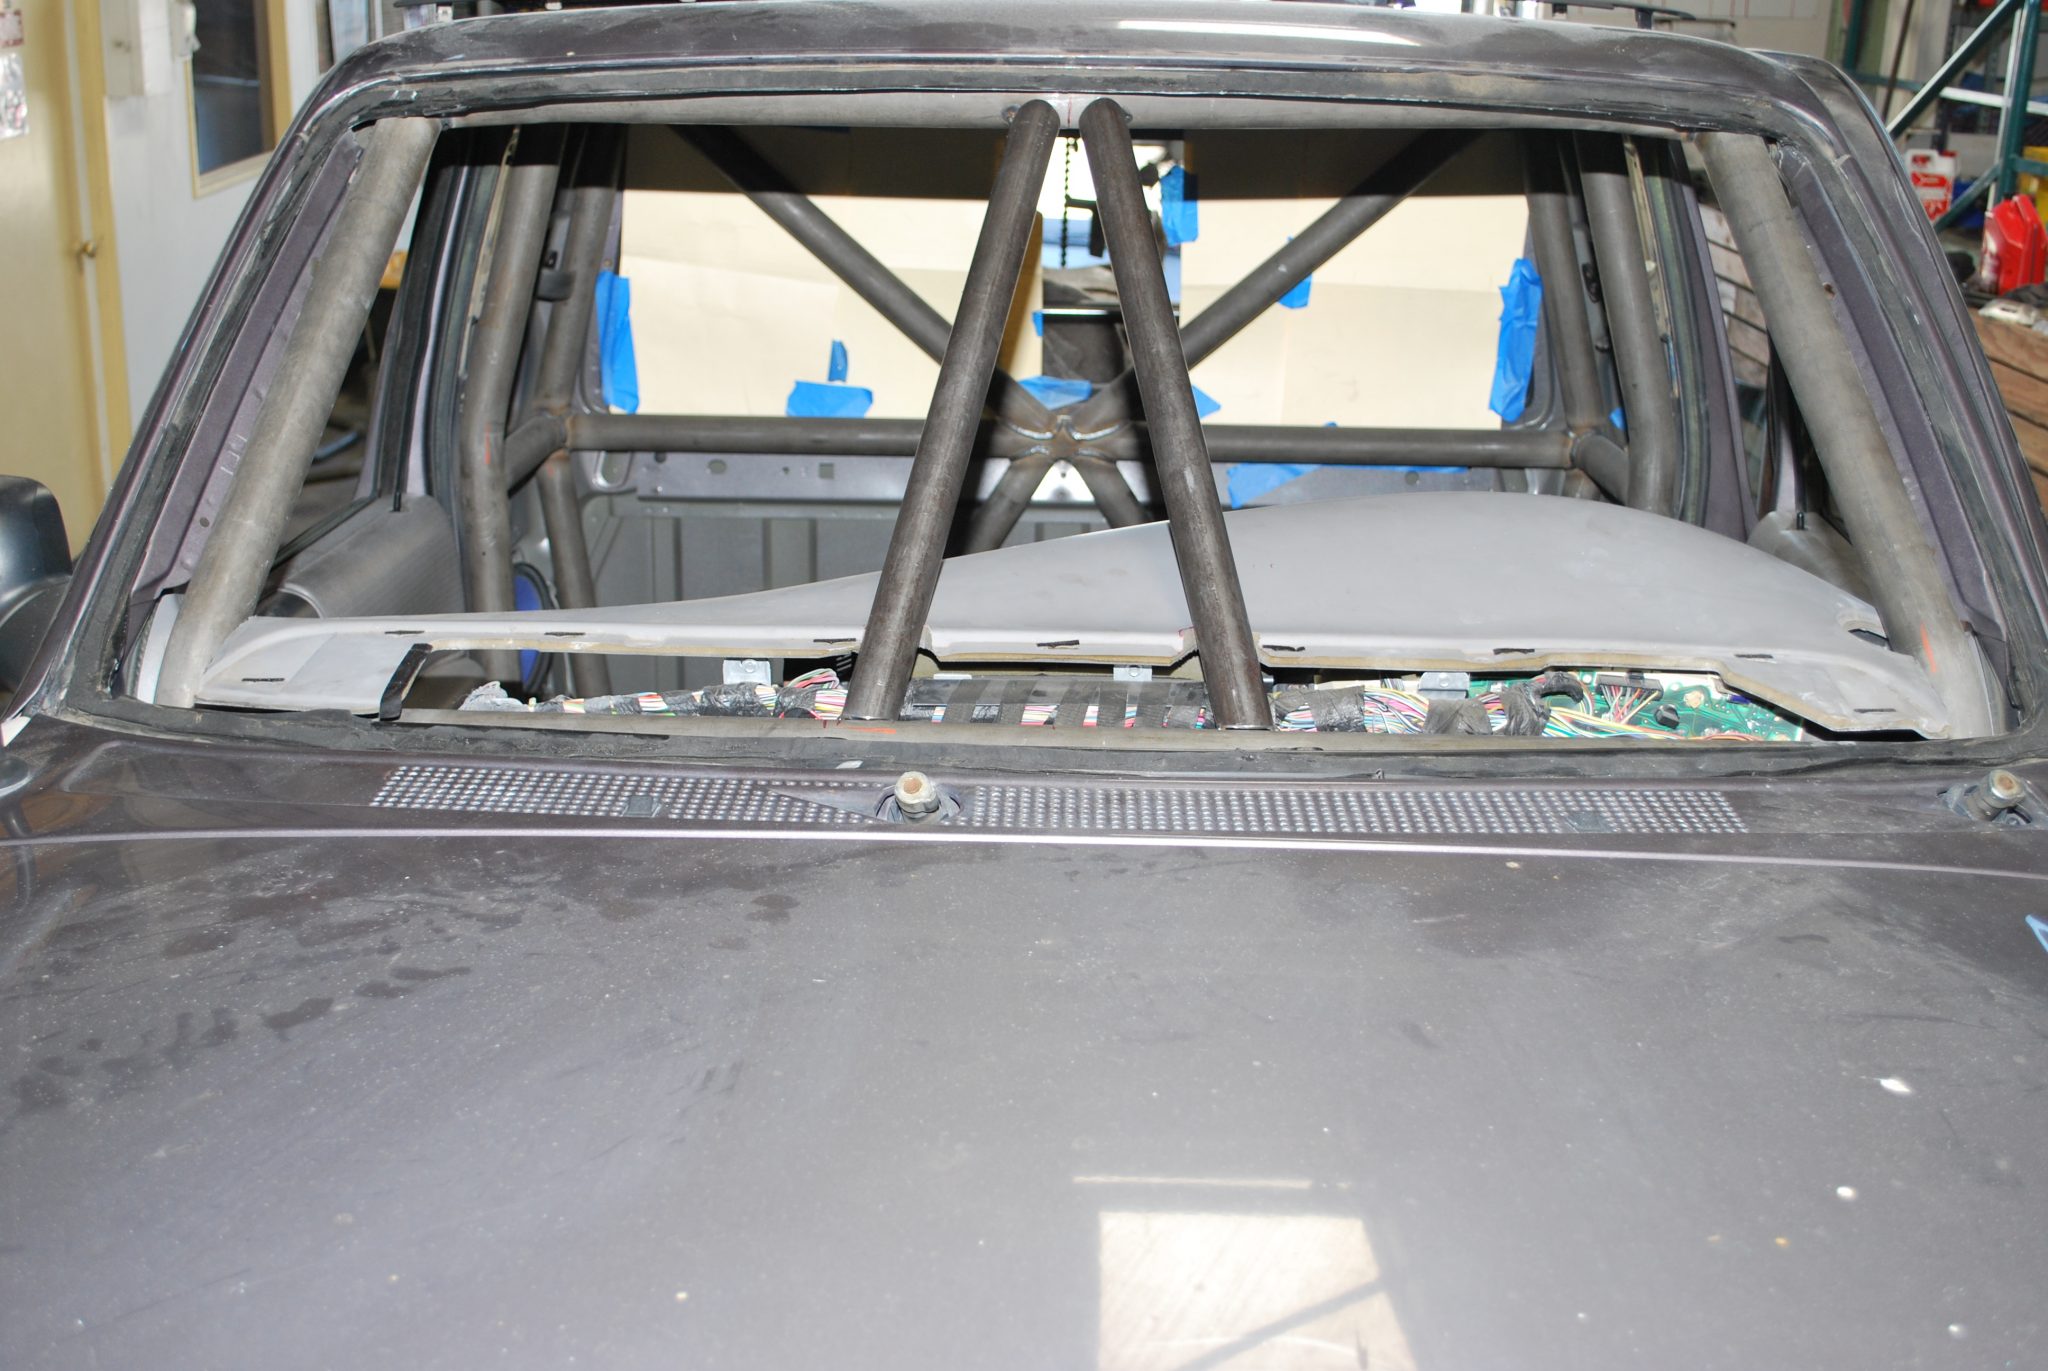 1997 Ford ranger roll cage